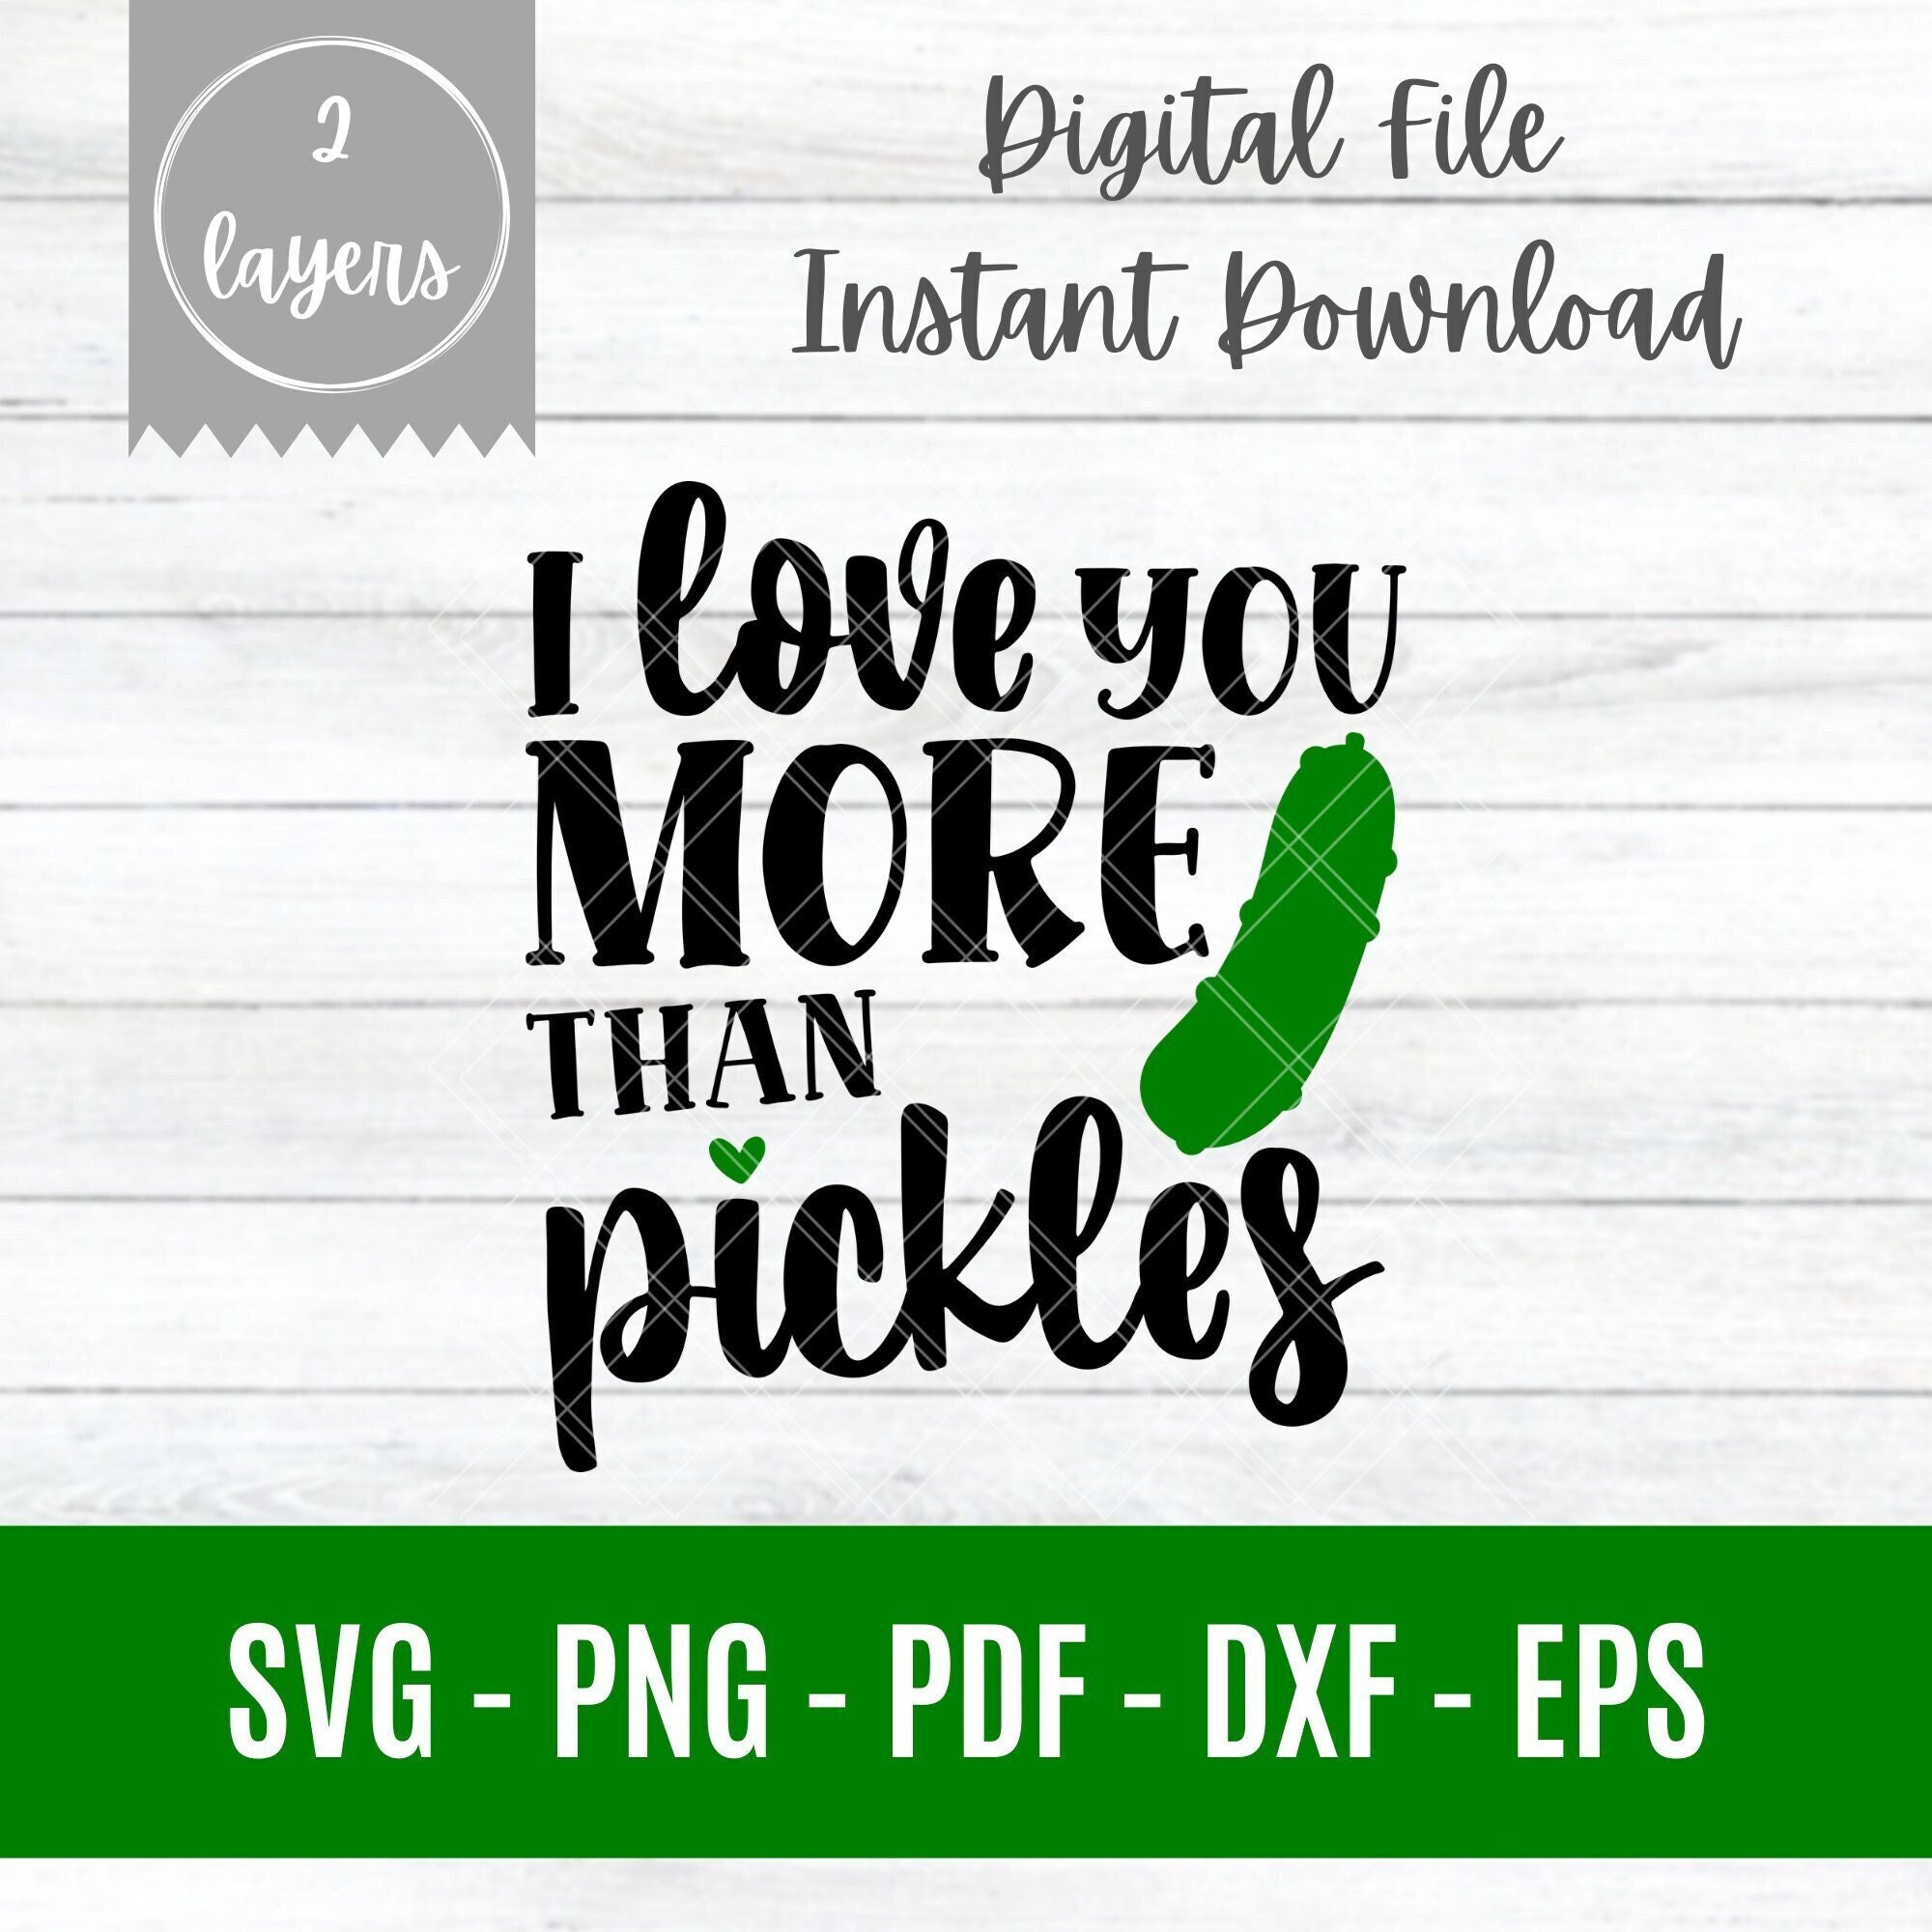 Dill with It Funny Pickles Gifts Graphic by CraftartSVG · Creative Fabrica